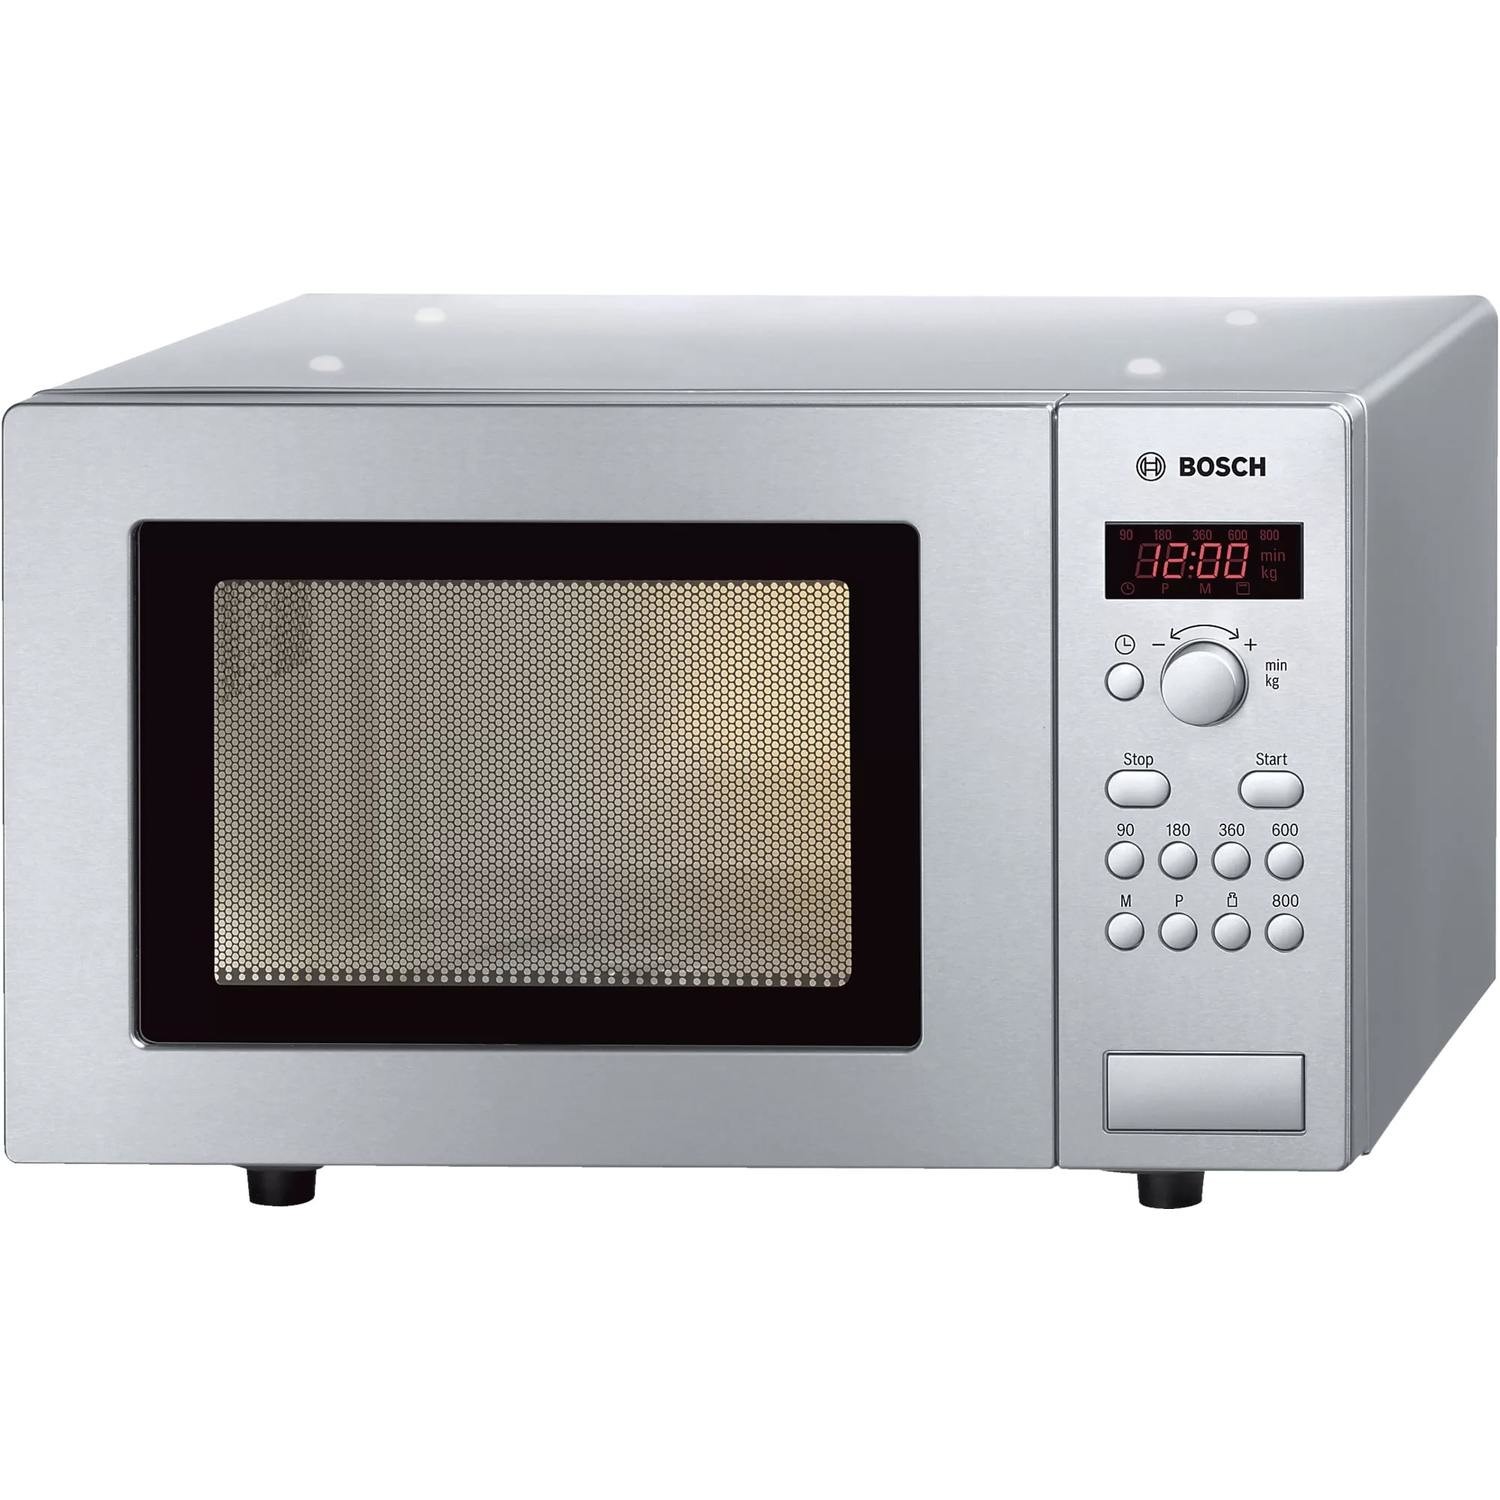 Bosch 17L Digital Solo Microwave Oven - Stainless Steel